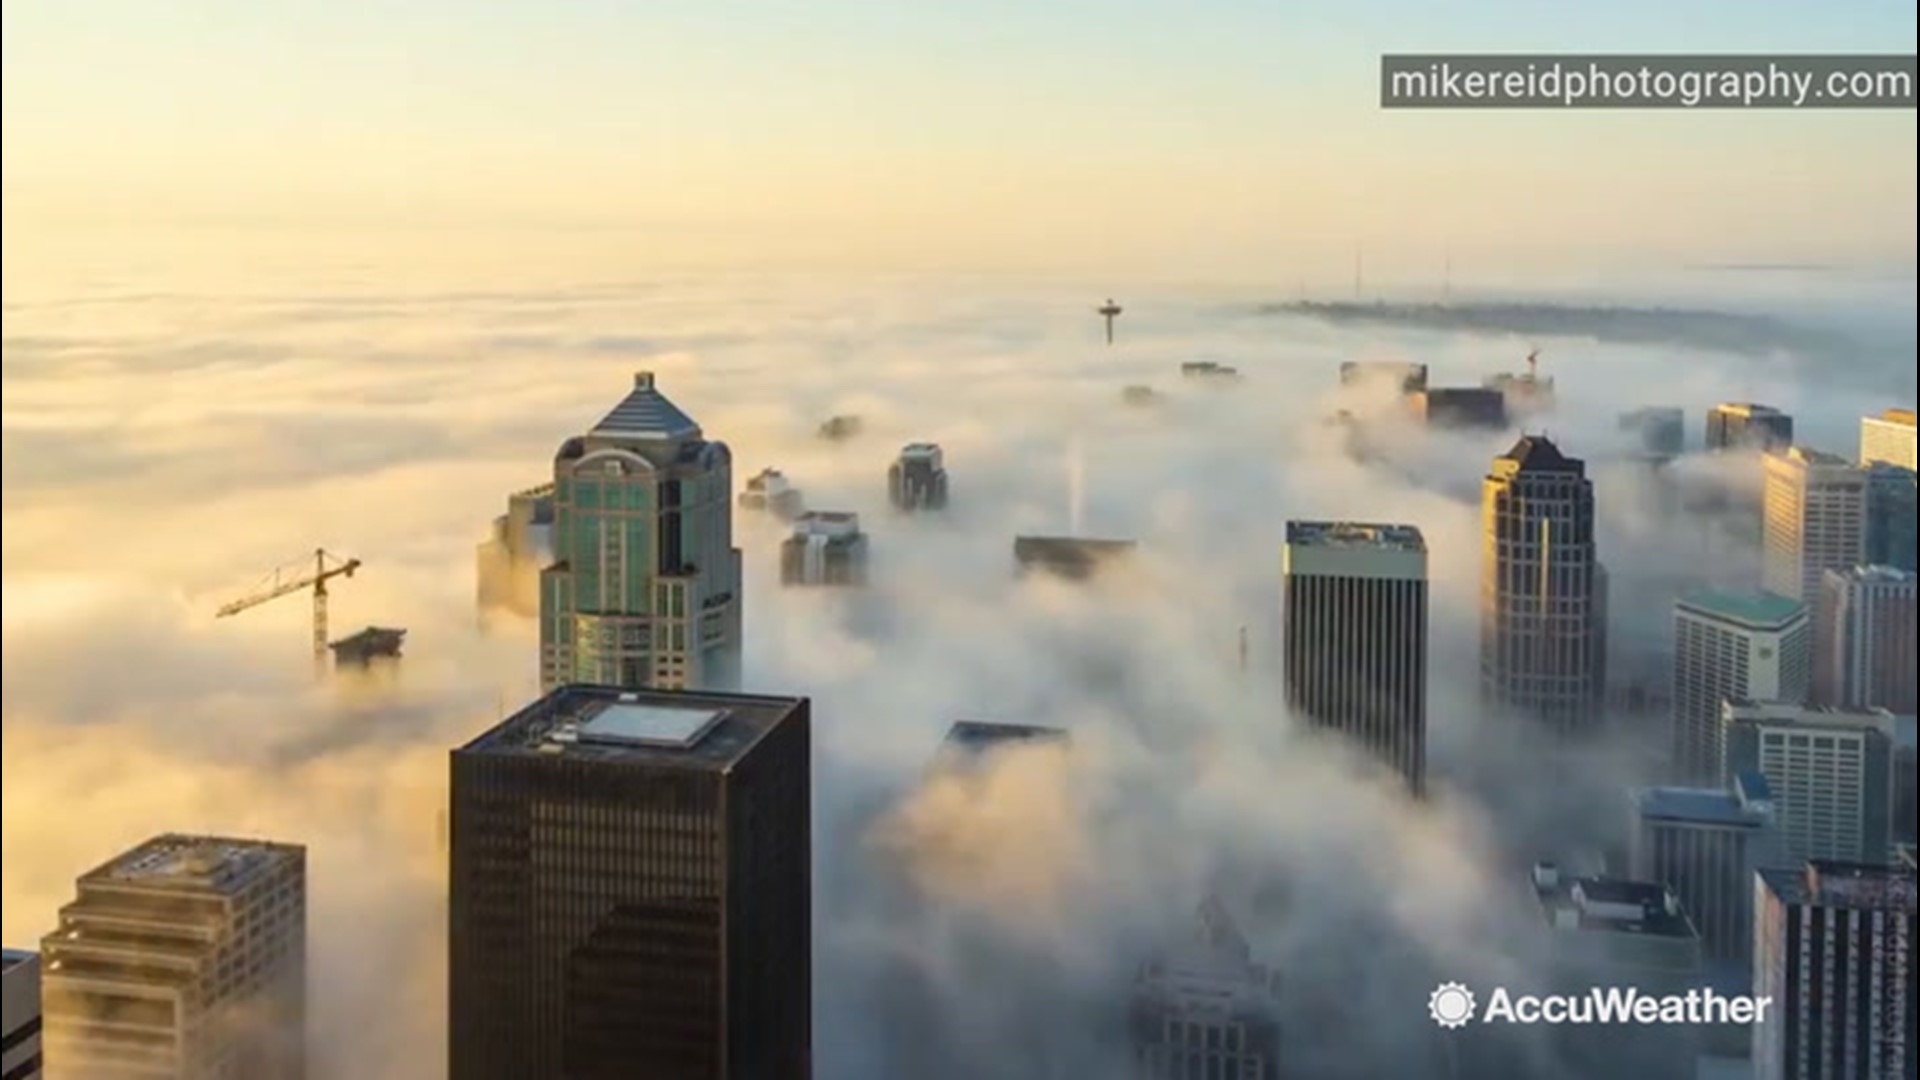 This timelapse video shows fog moving into Seattle on a November day, hiding nearly all of the city underneath except for a few skyscrapers.